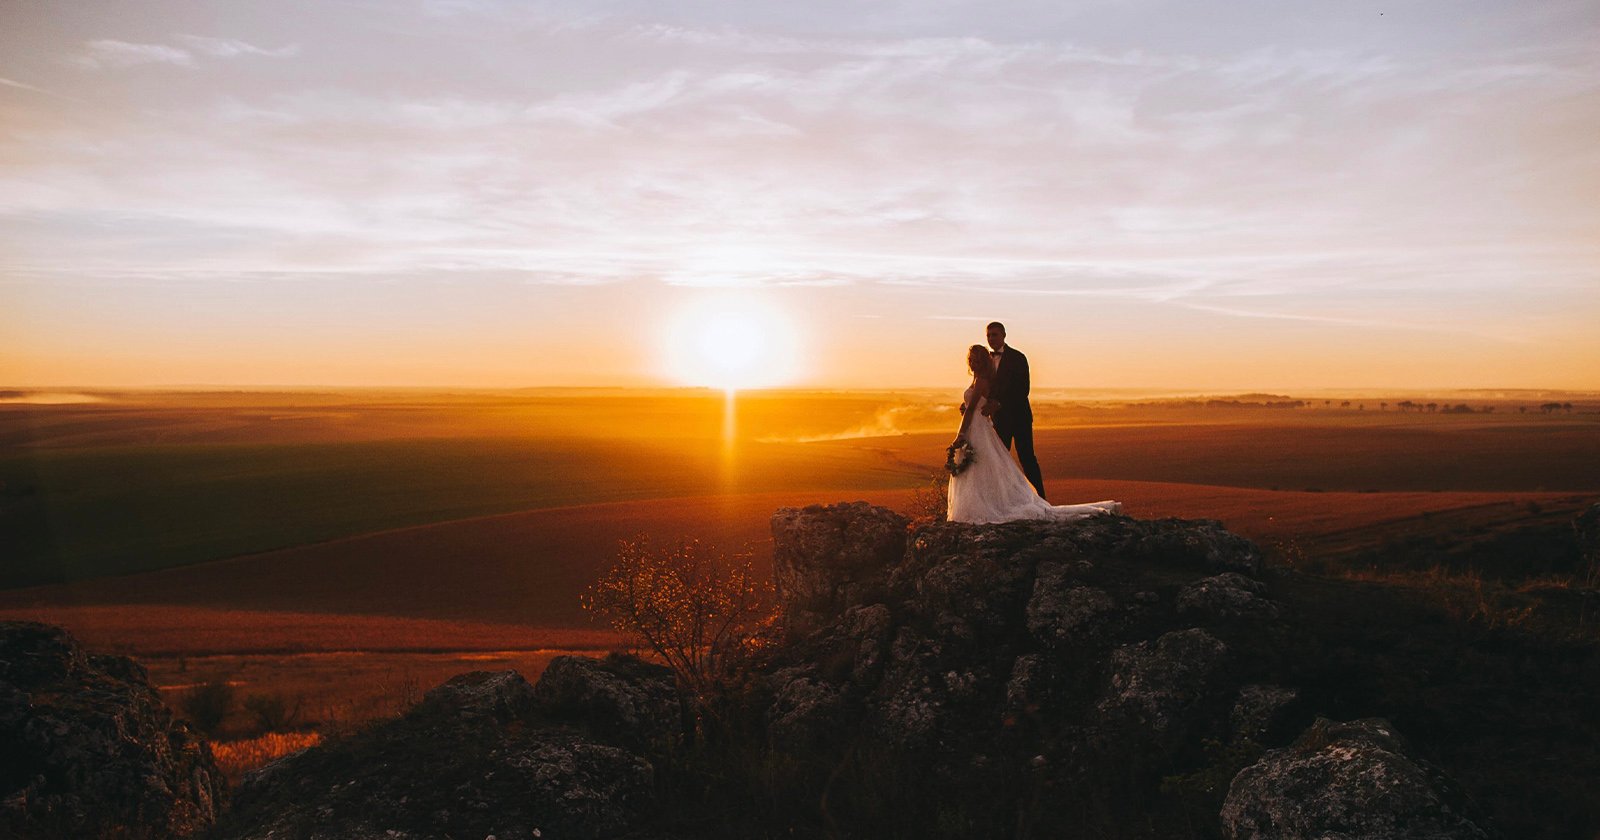 Wedding couple at a sunset